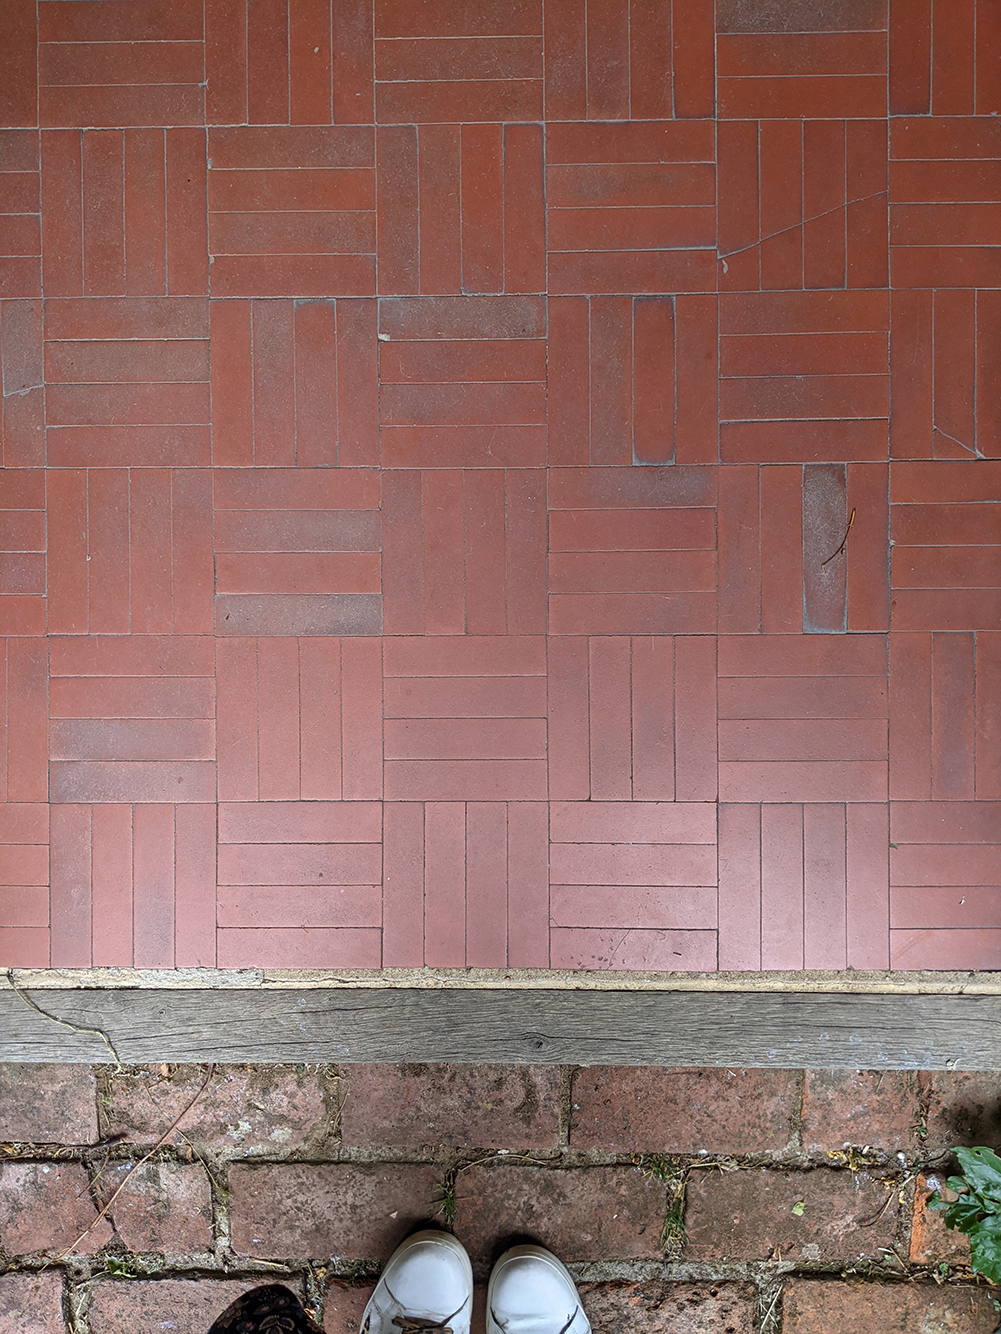 A photo I took of the flooring tiles at The Red House, Bexleyheath.